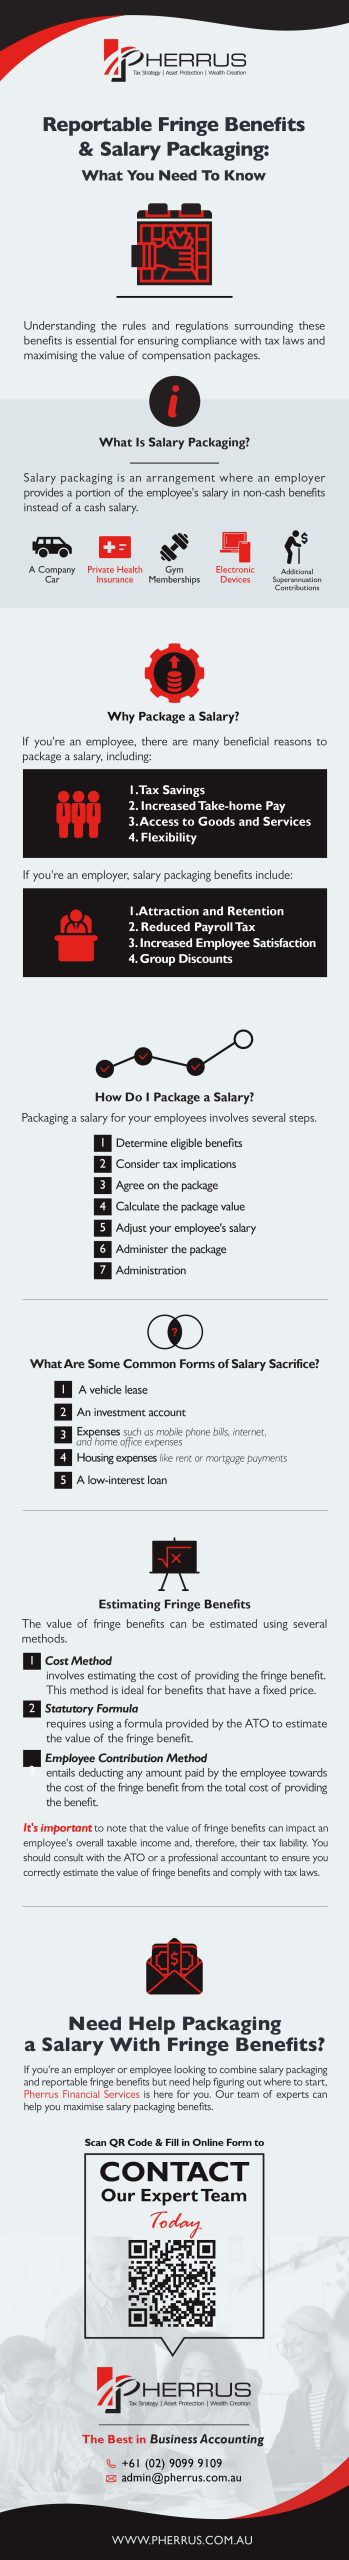 Reportable Fringe Benefits And Salary Packaging- What You Need To Know Infographic